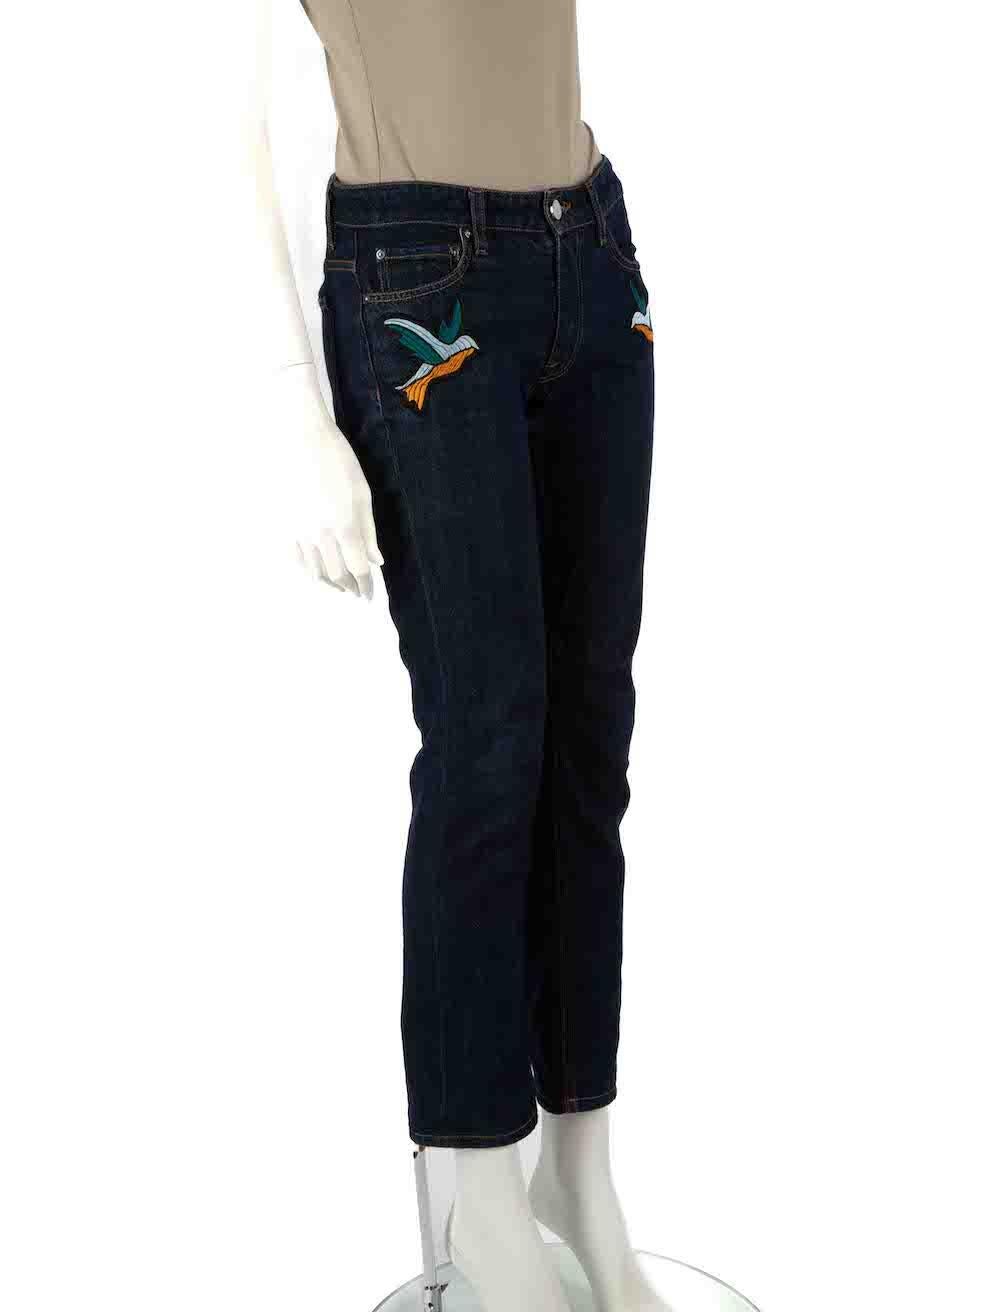 CONDITION is Very good. Minimal wear to trousers is evident. Minimal loose thread to front button stitching. The front button closure is slightly tarnished on this used Victoria Victoria Beckham designer resale item.
 
Details
Blue
Denim
Jeans
Slim